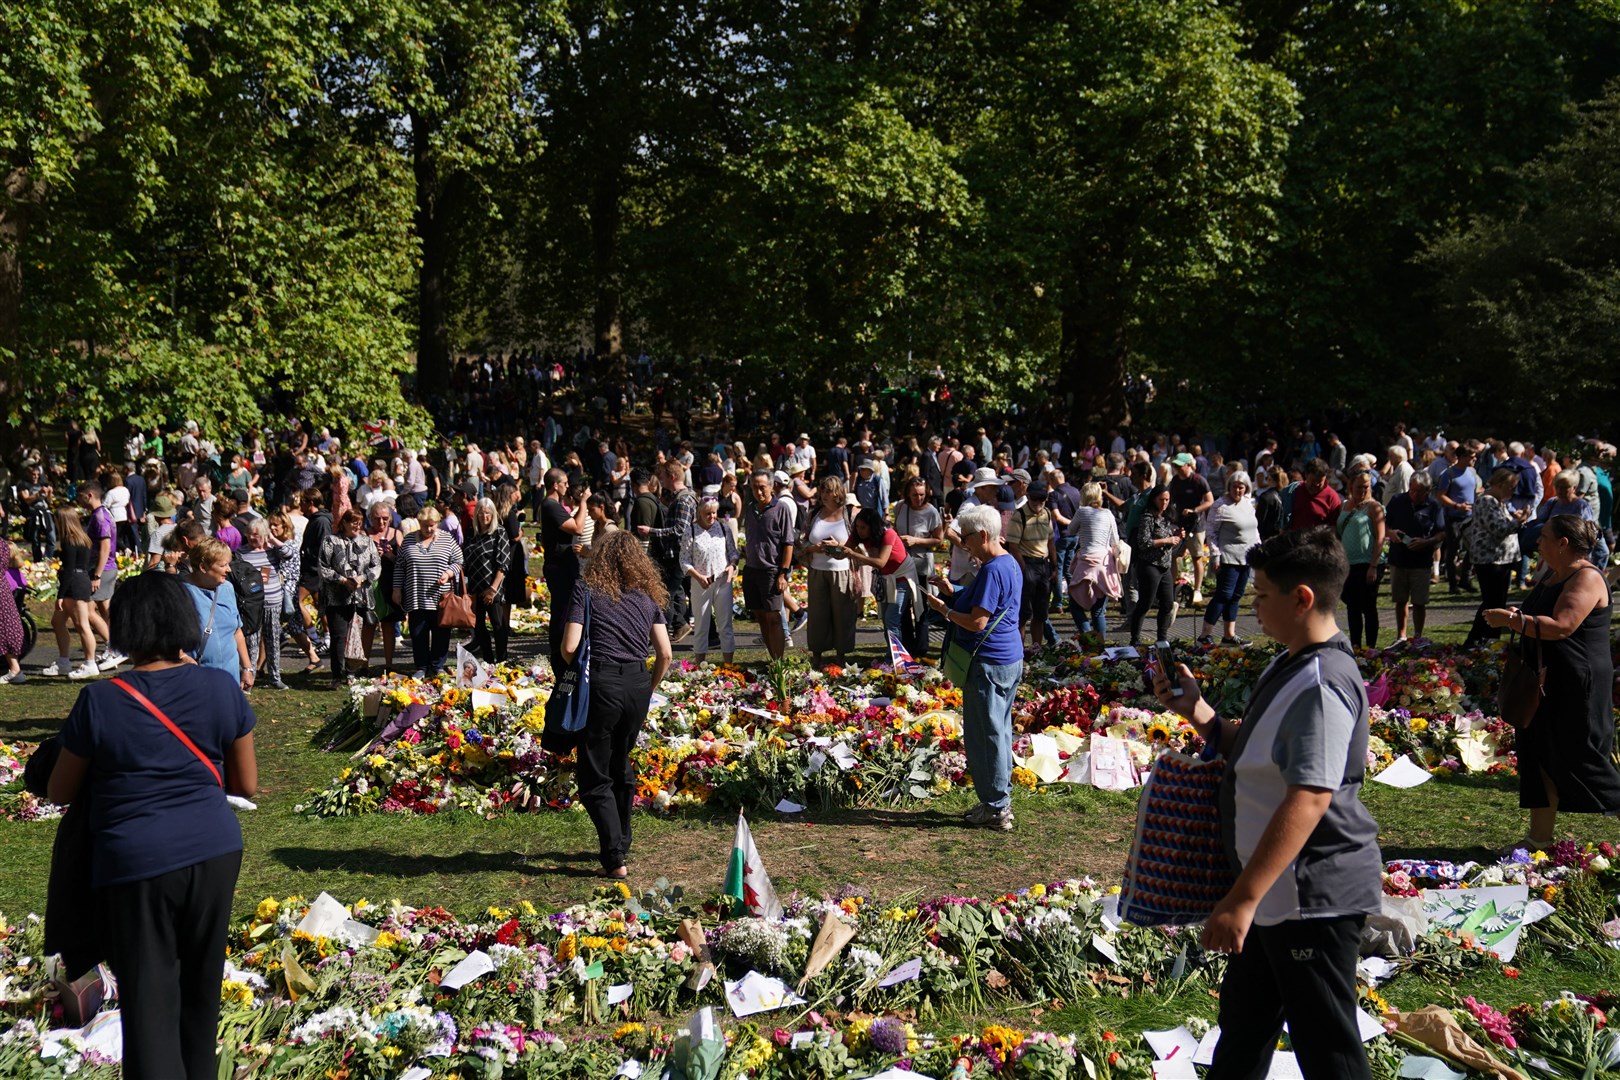 Members of the public view floral tributes in Green Park, near Buckingham Palace. (Joe Giddens/PA)